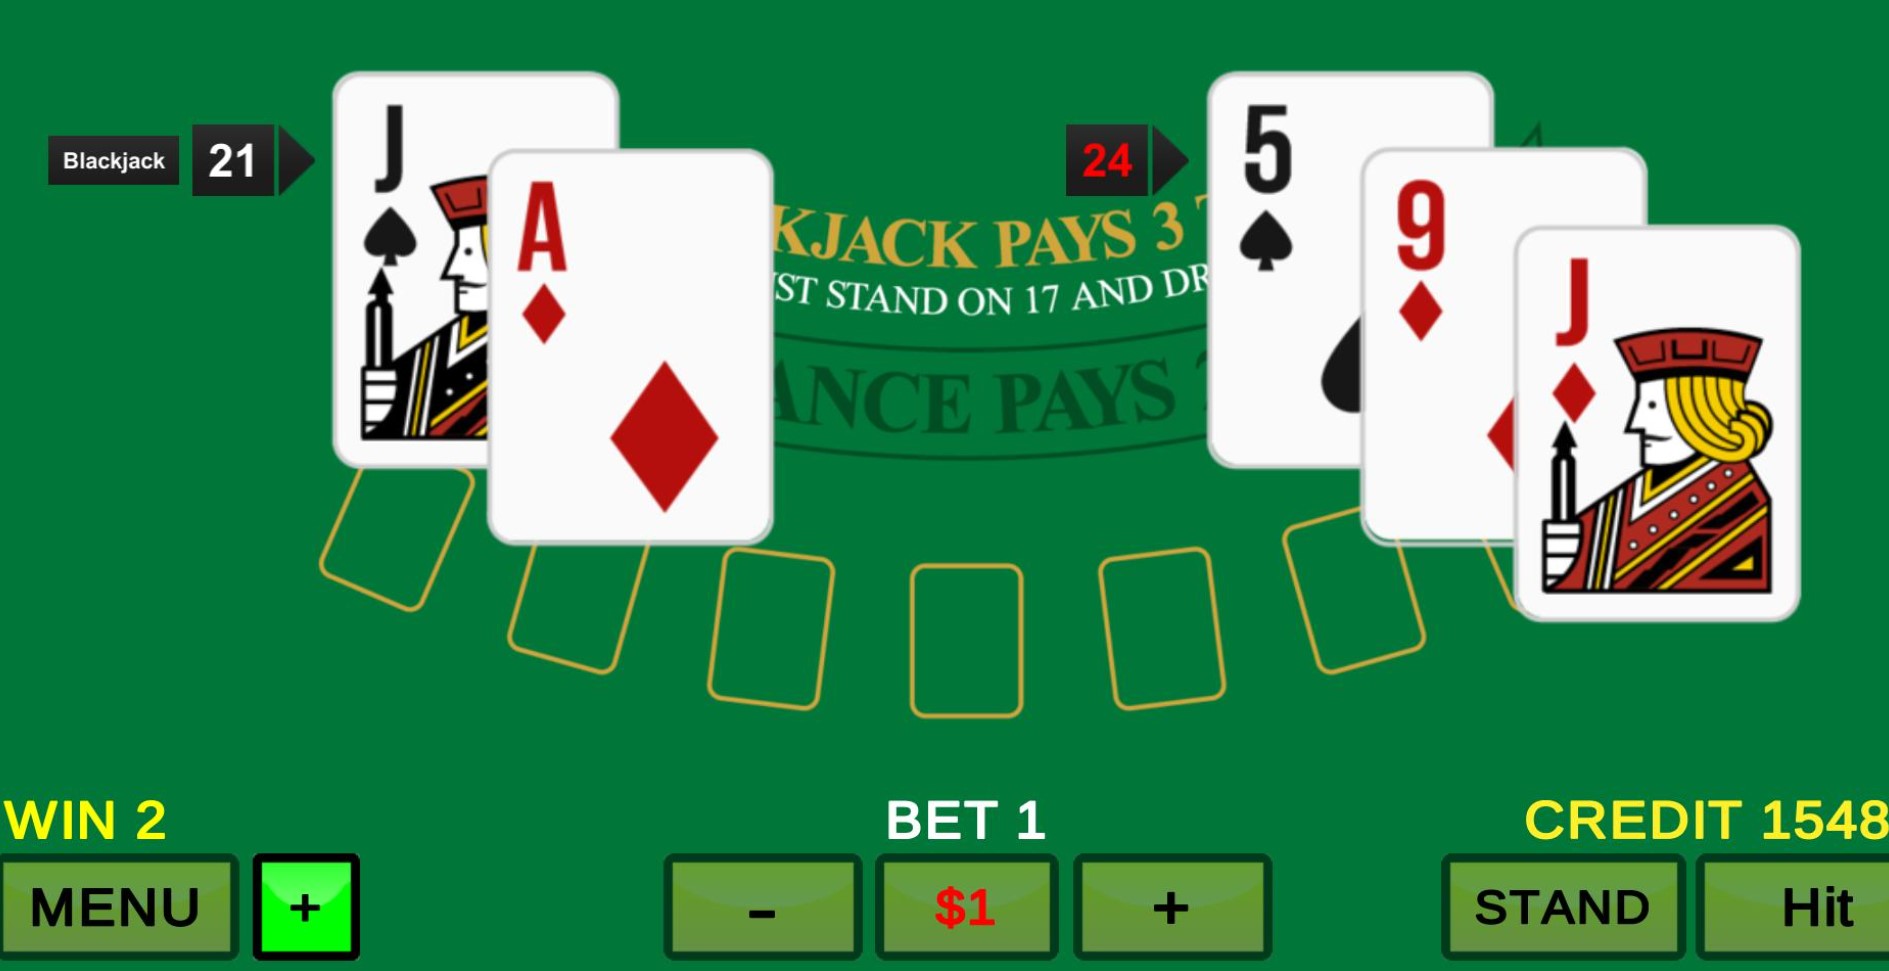 Mistakes that beginners often make in blackjack and how to avoid them